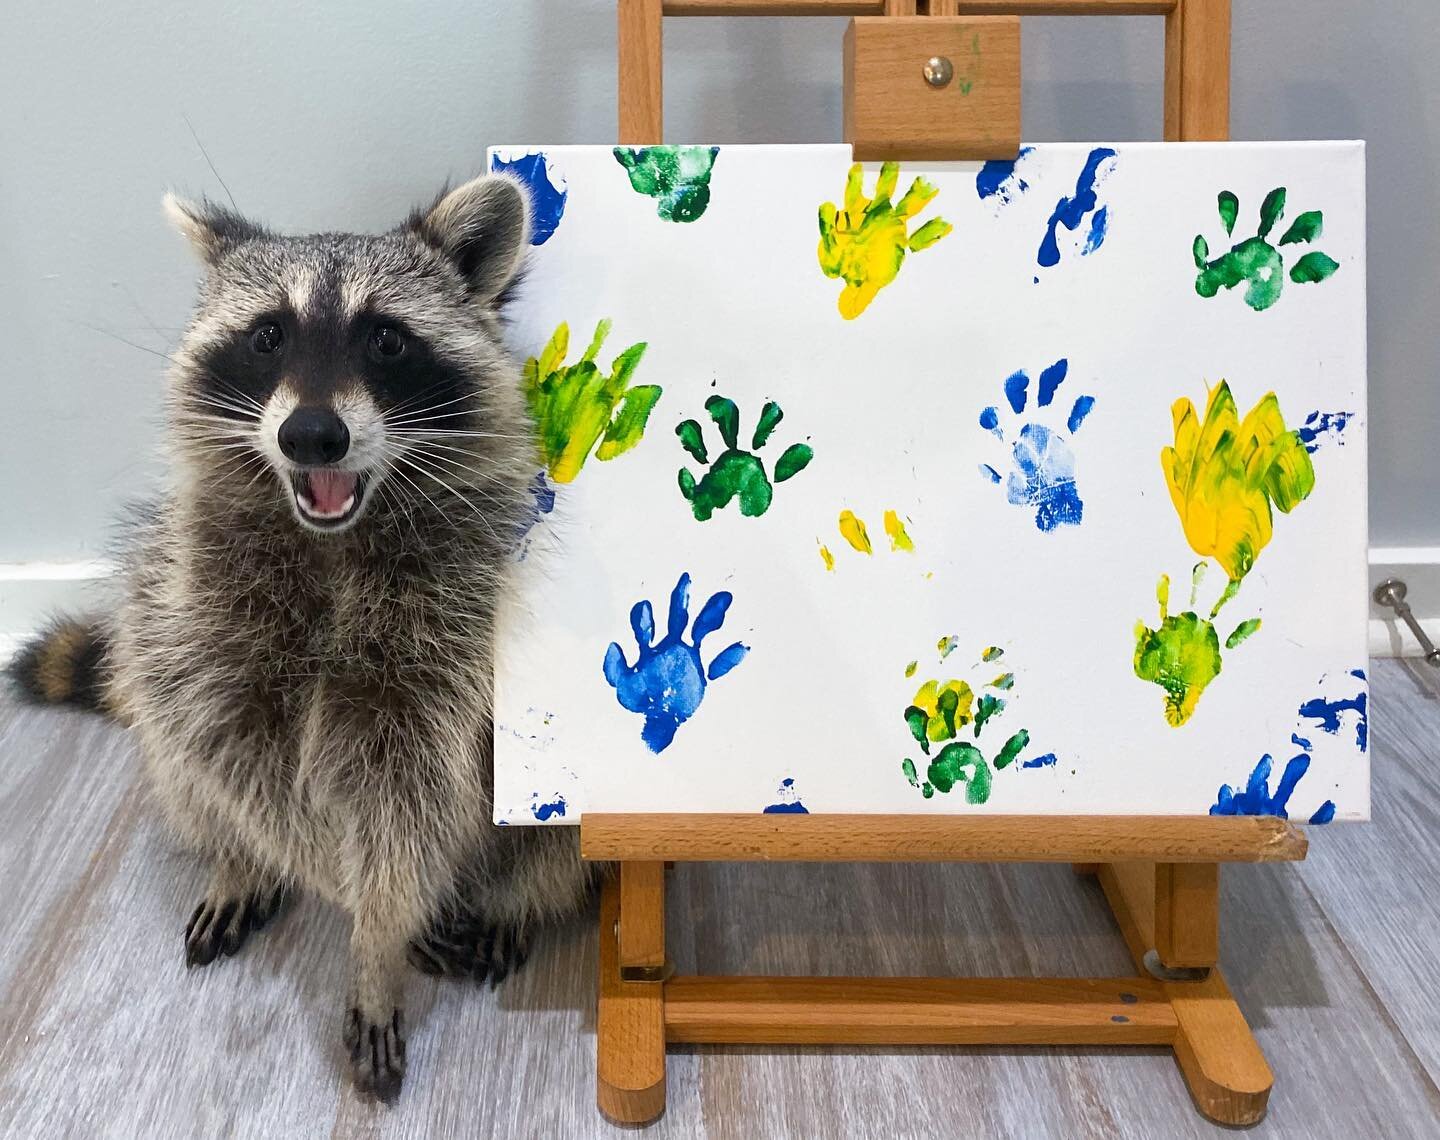 Piper has new paintings in stock! Order now to beat the holiday rush! (we will have limited supply) Link to shop is in our bio 🦝🎨
&bull;
&bull;
&bull;
&bull;
&bull;
#raccoon #raccoons #weeklyfluff #raccoonlife #9gag #raccooncafe #raccoonsofinstagra